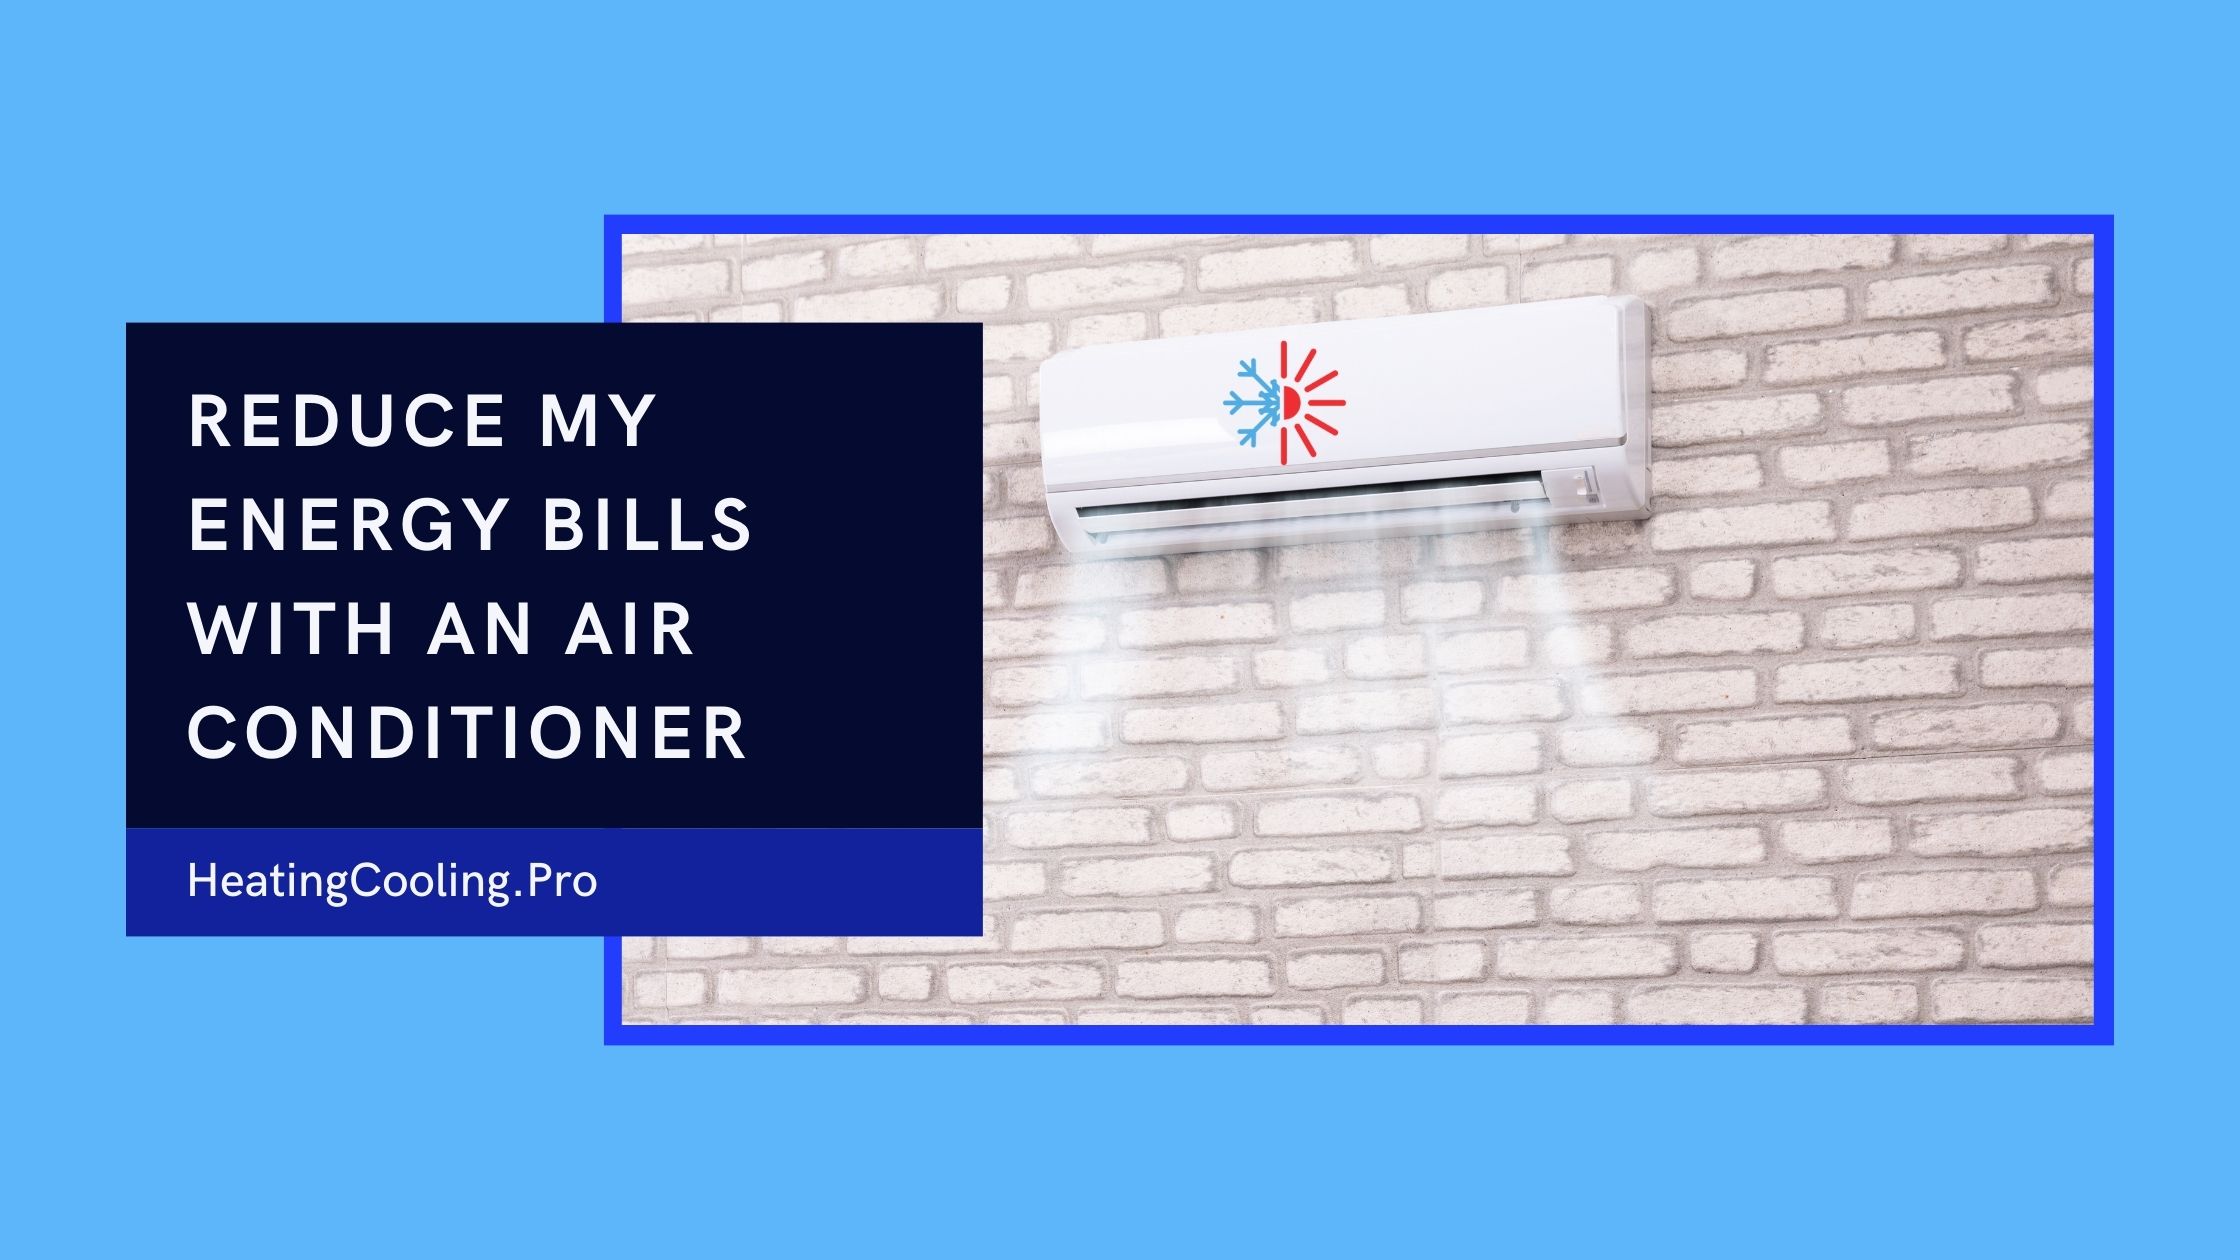 How Can I Reduce My Energy Bills With An Air Conditioner?